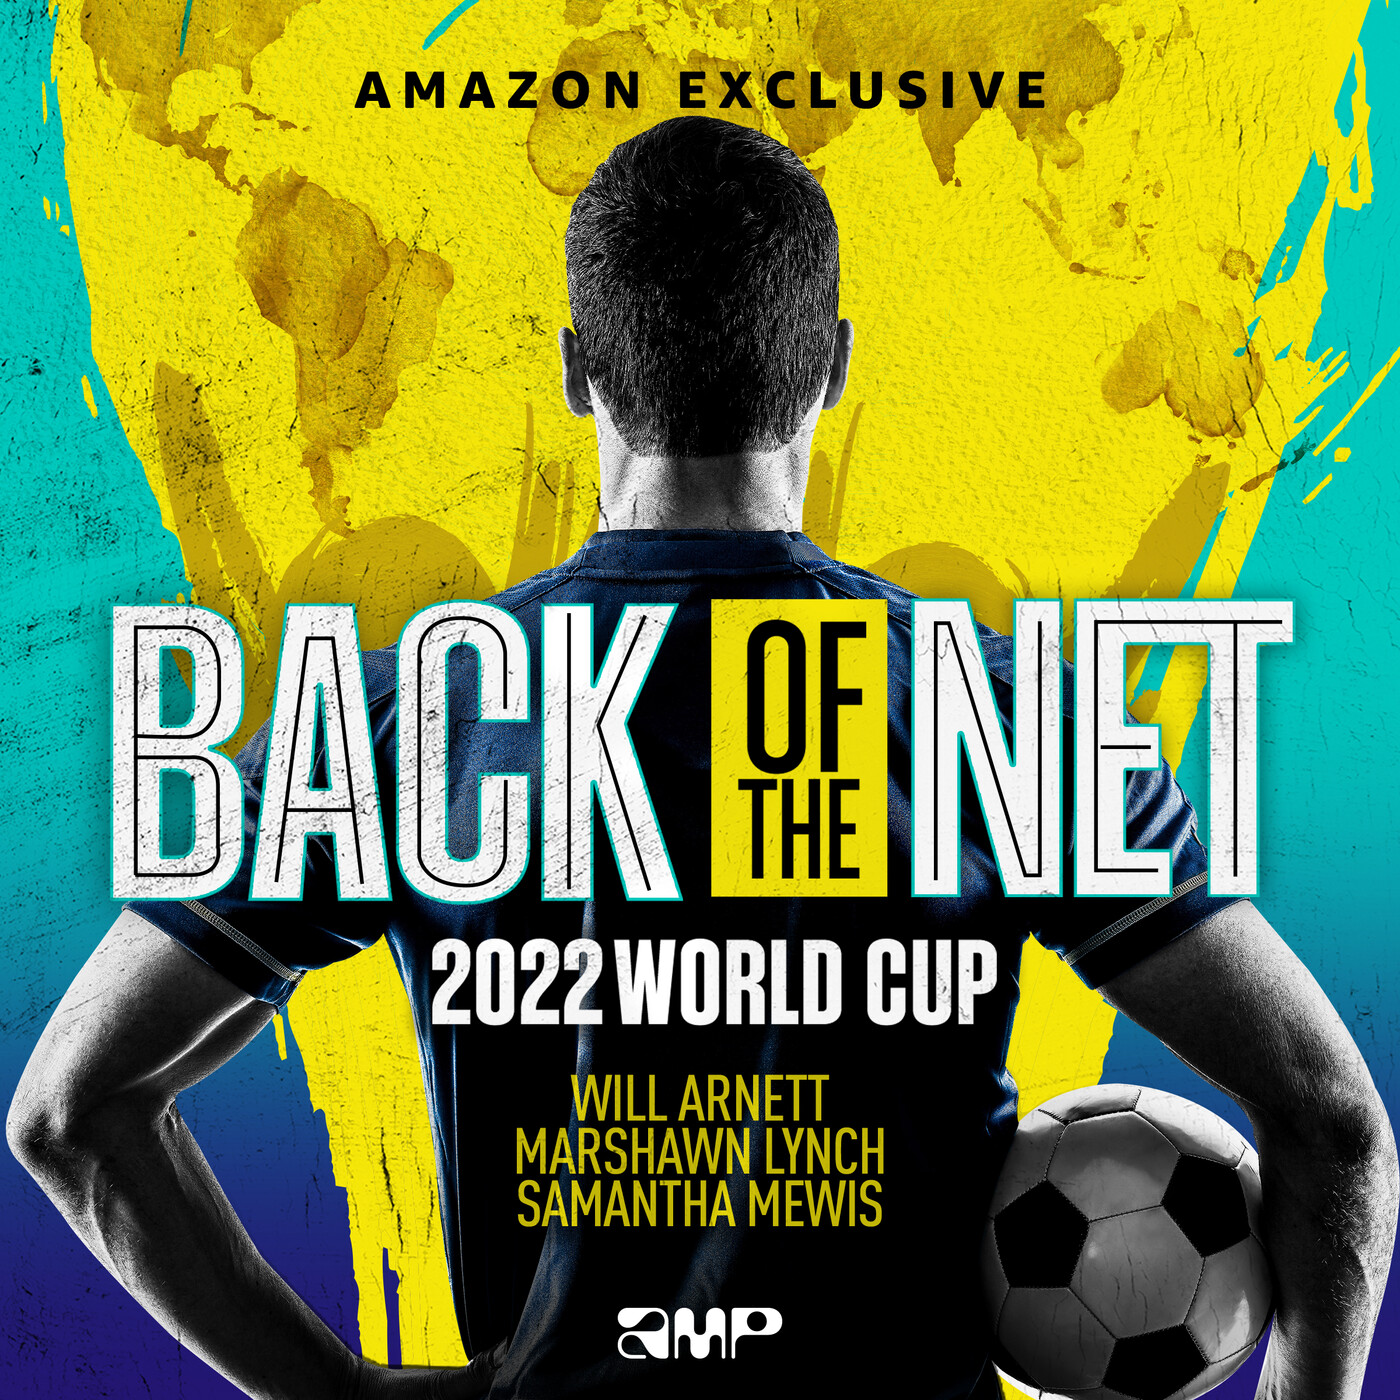 Back of the Net: 2022 World Cup